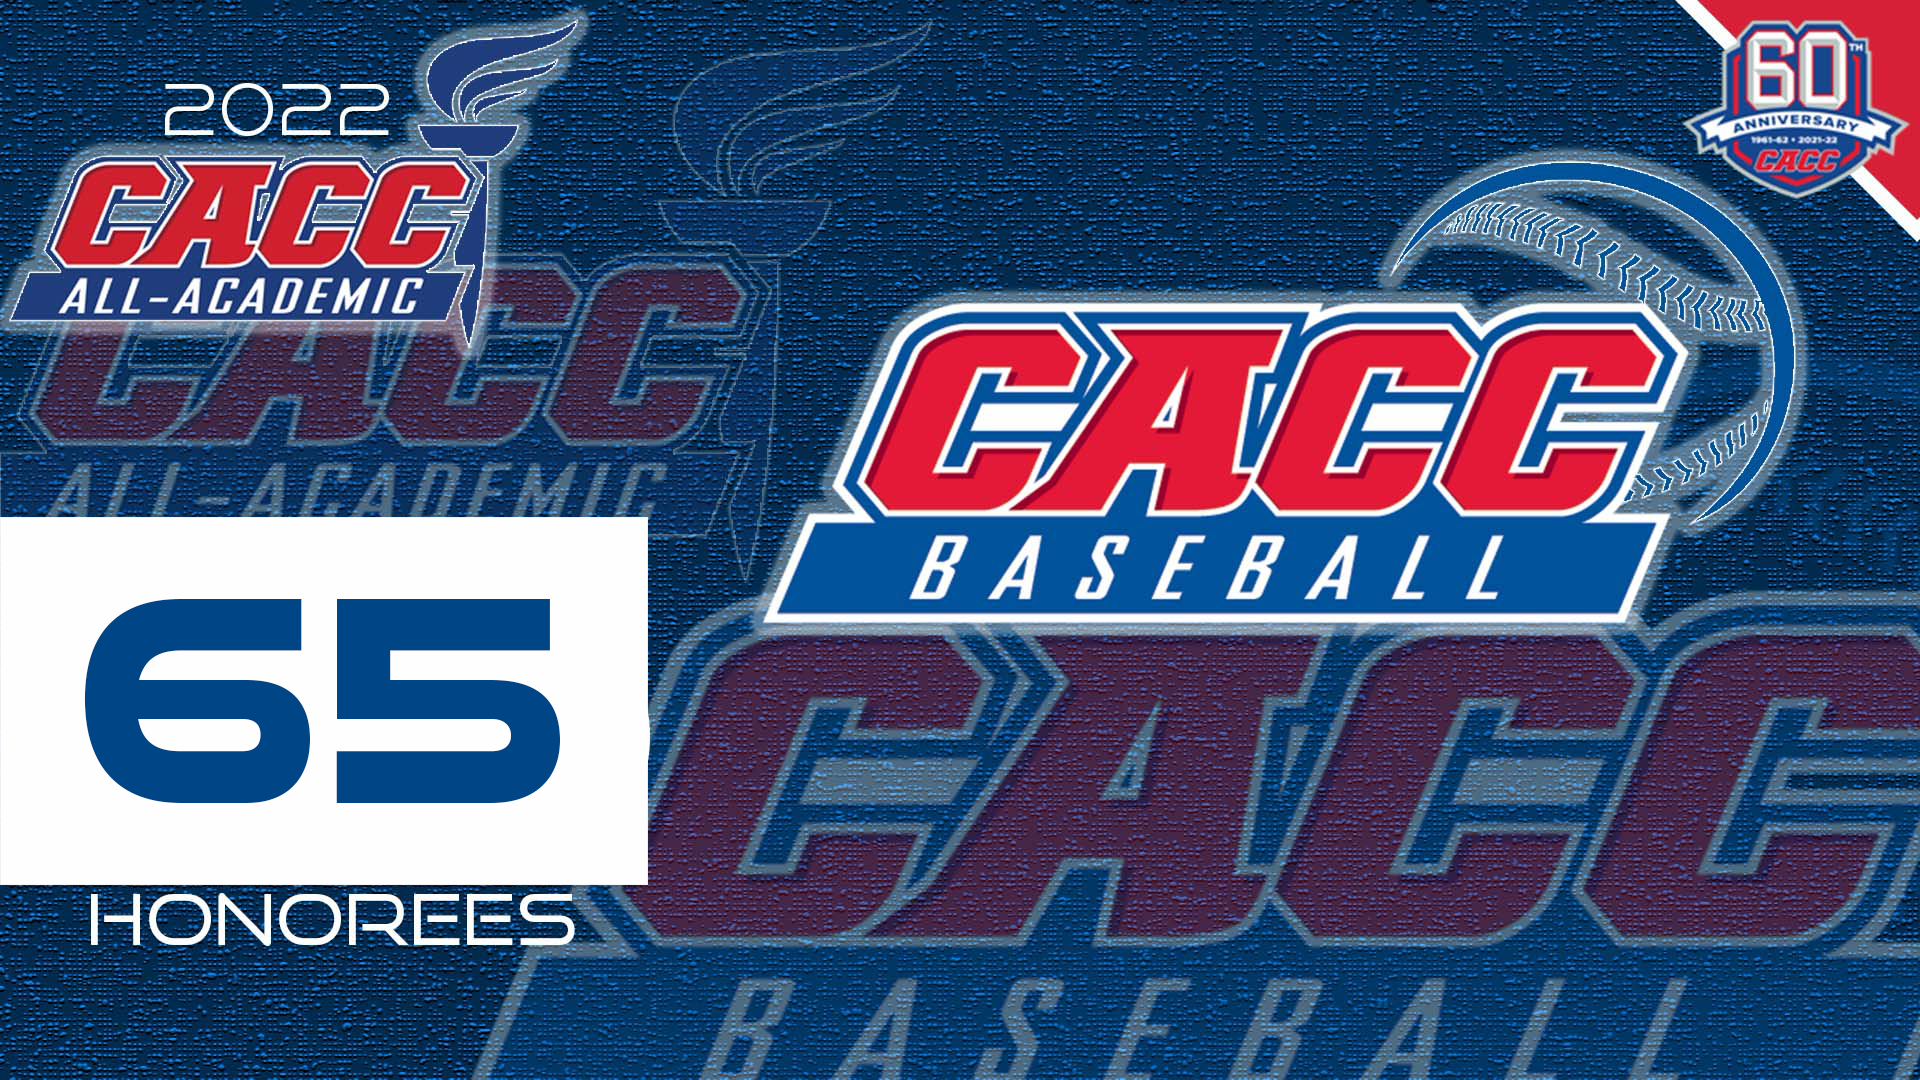 FIVE CHARGERS NAMED TO 21-22 CACC BASEBALL ALL-ACADEMIC TEAM